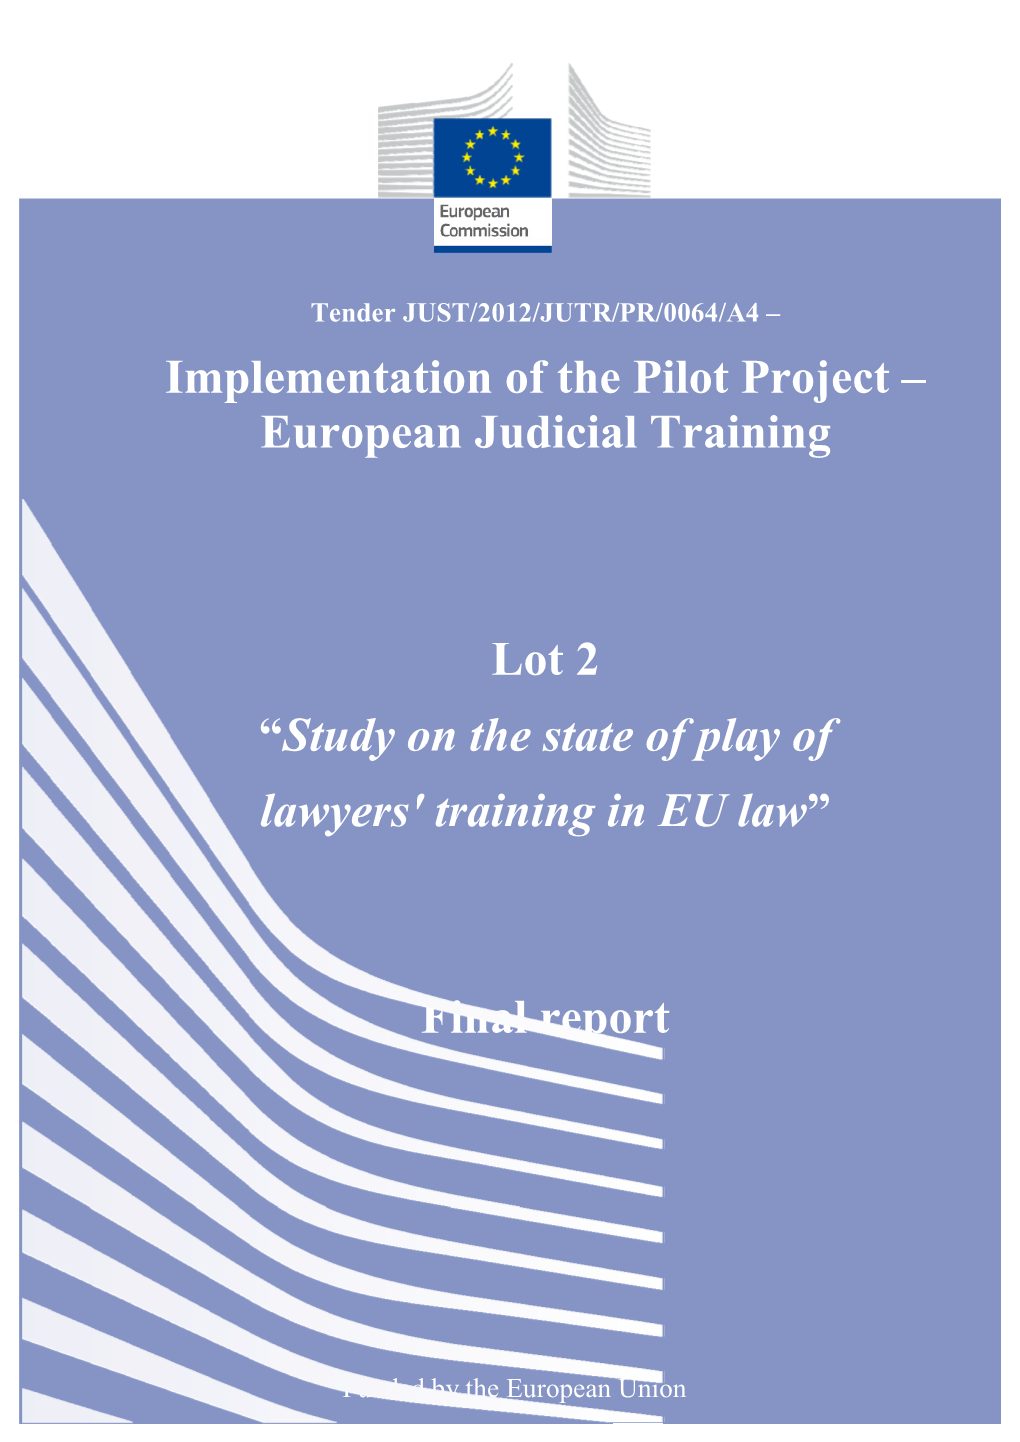 “Study on the State of Play of Lawyers' Training in EU Law” Final Report